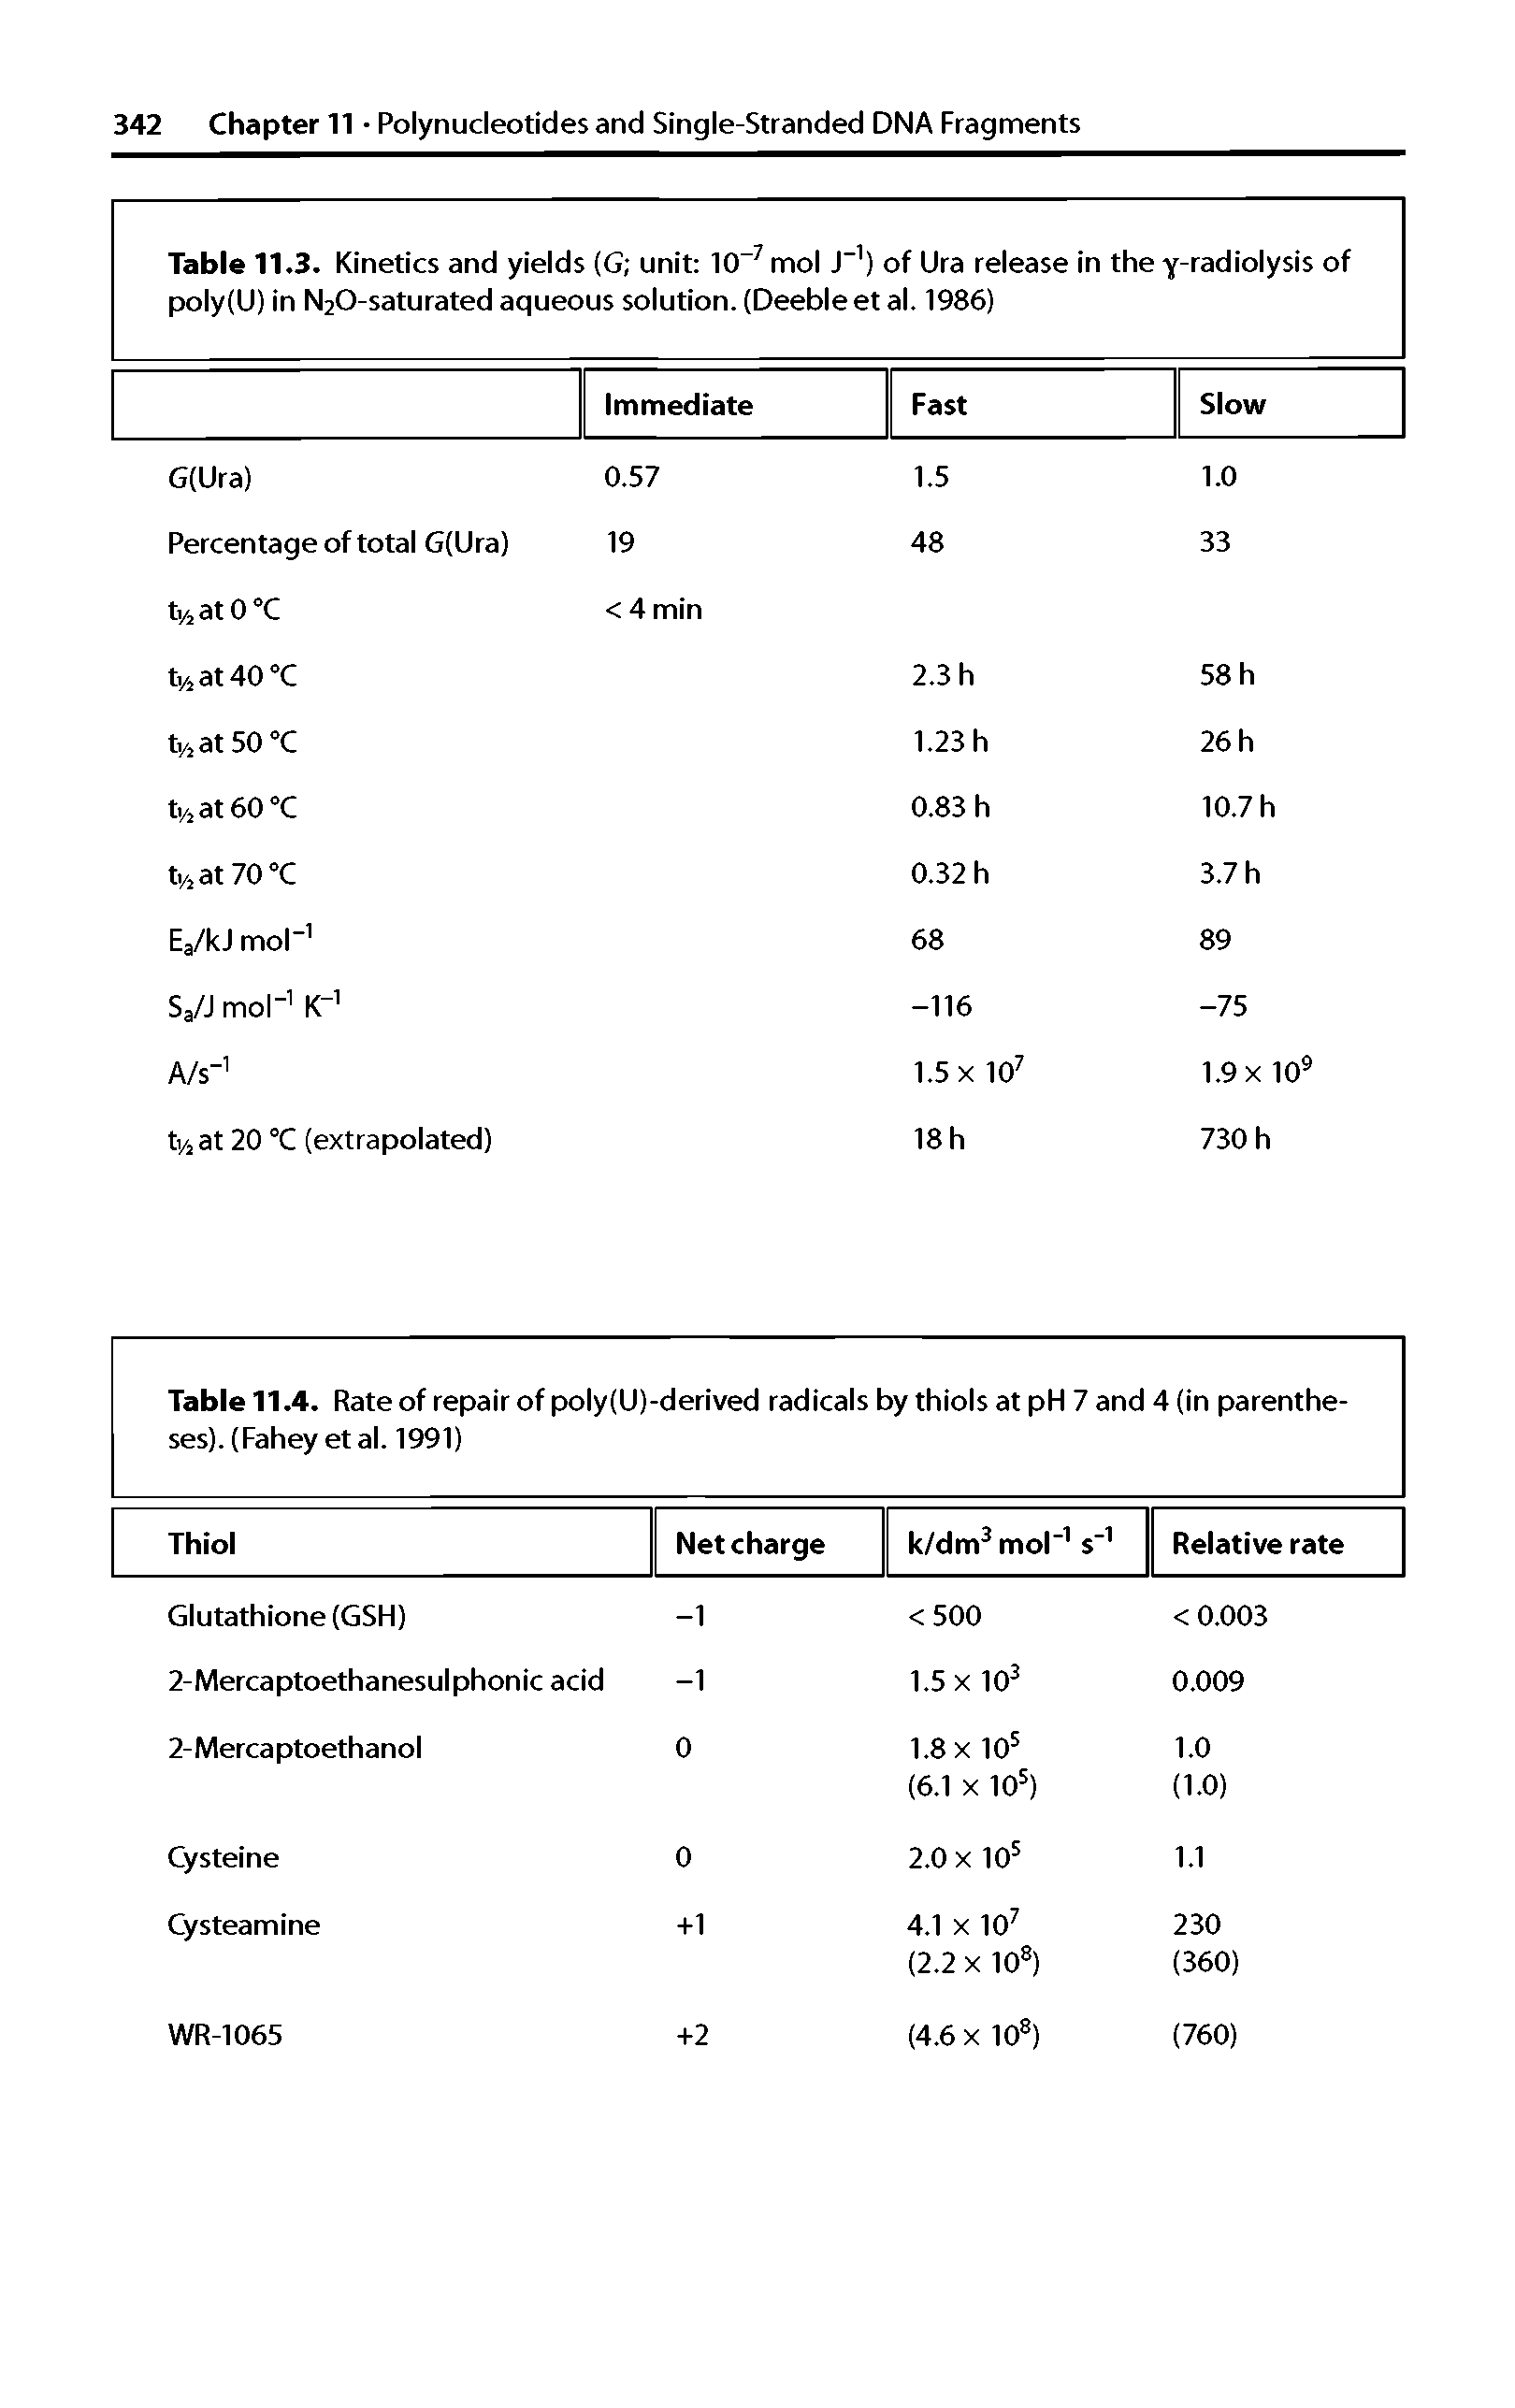 Table 11.4. Rate of repair of poly(U)-derived radicals by thiols at pH 7 and 4 (in parentheses). (Fahey et al. 1991) ...